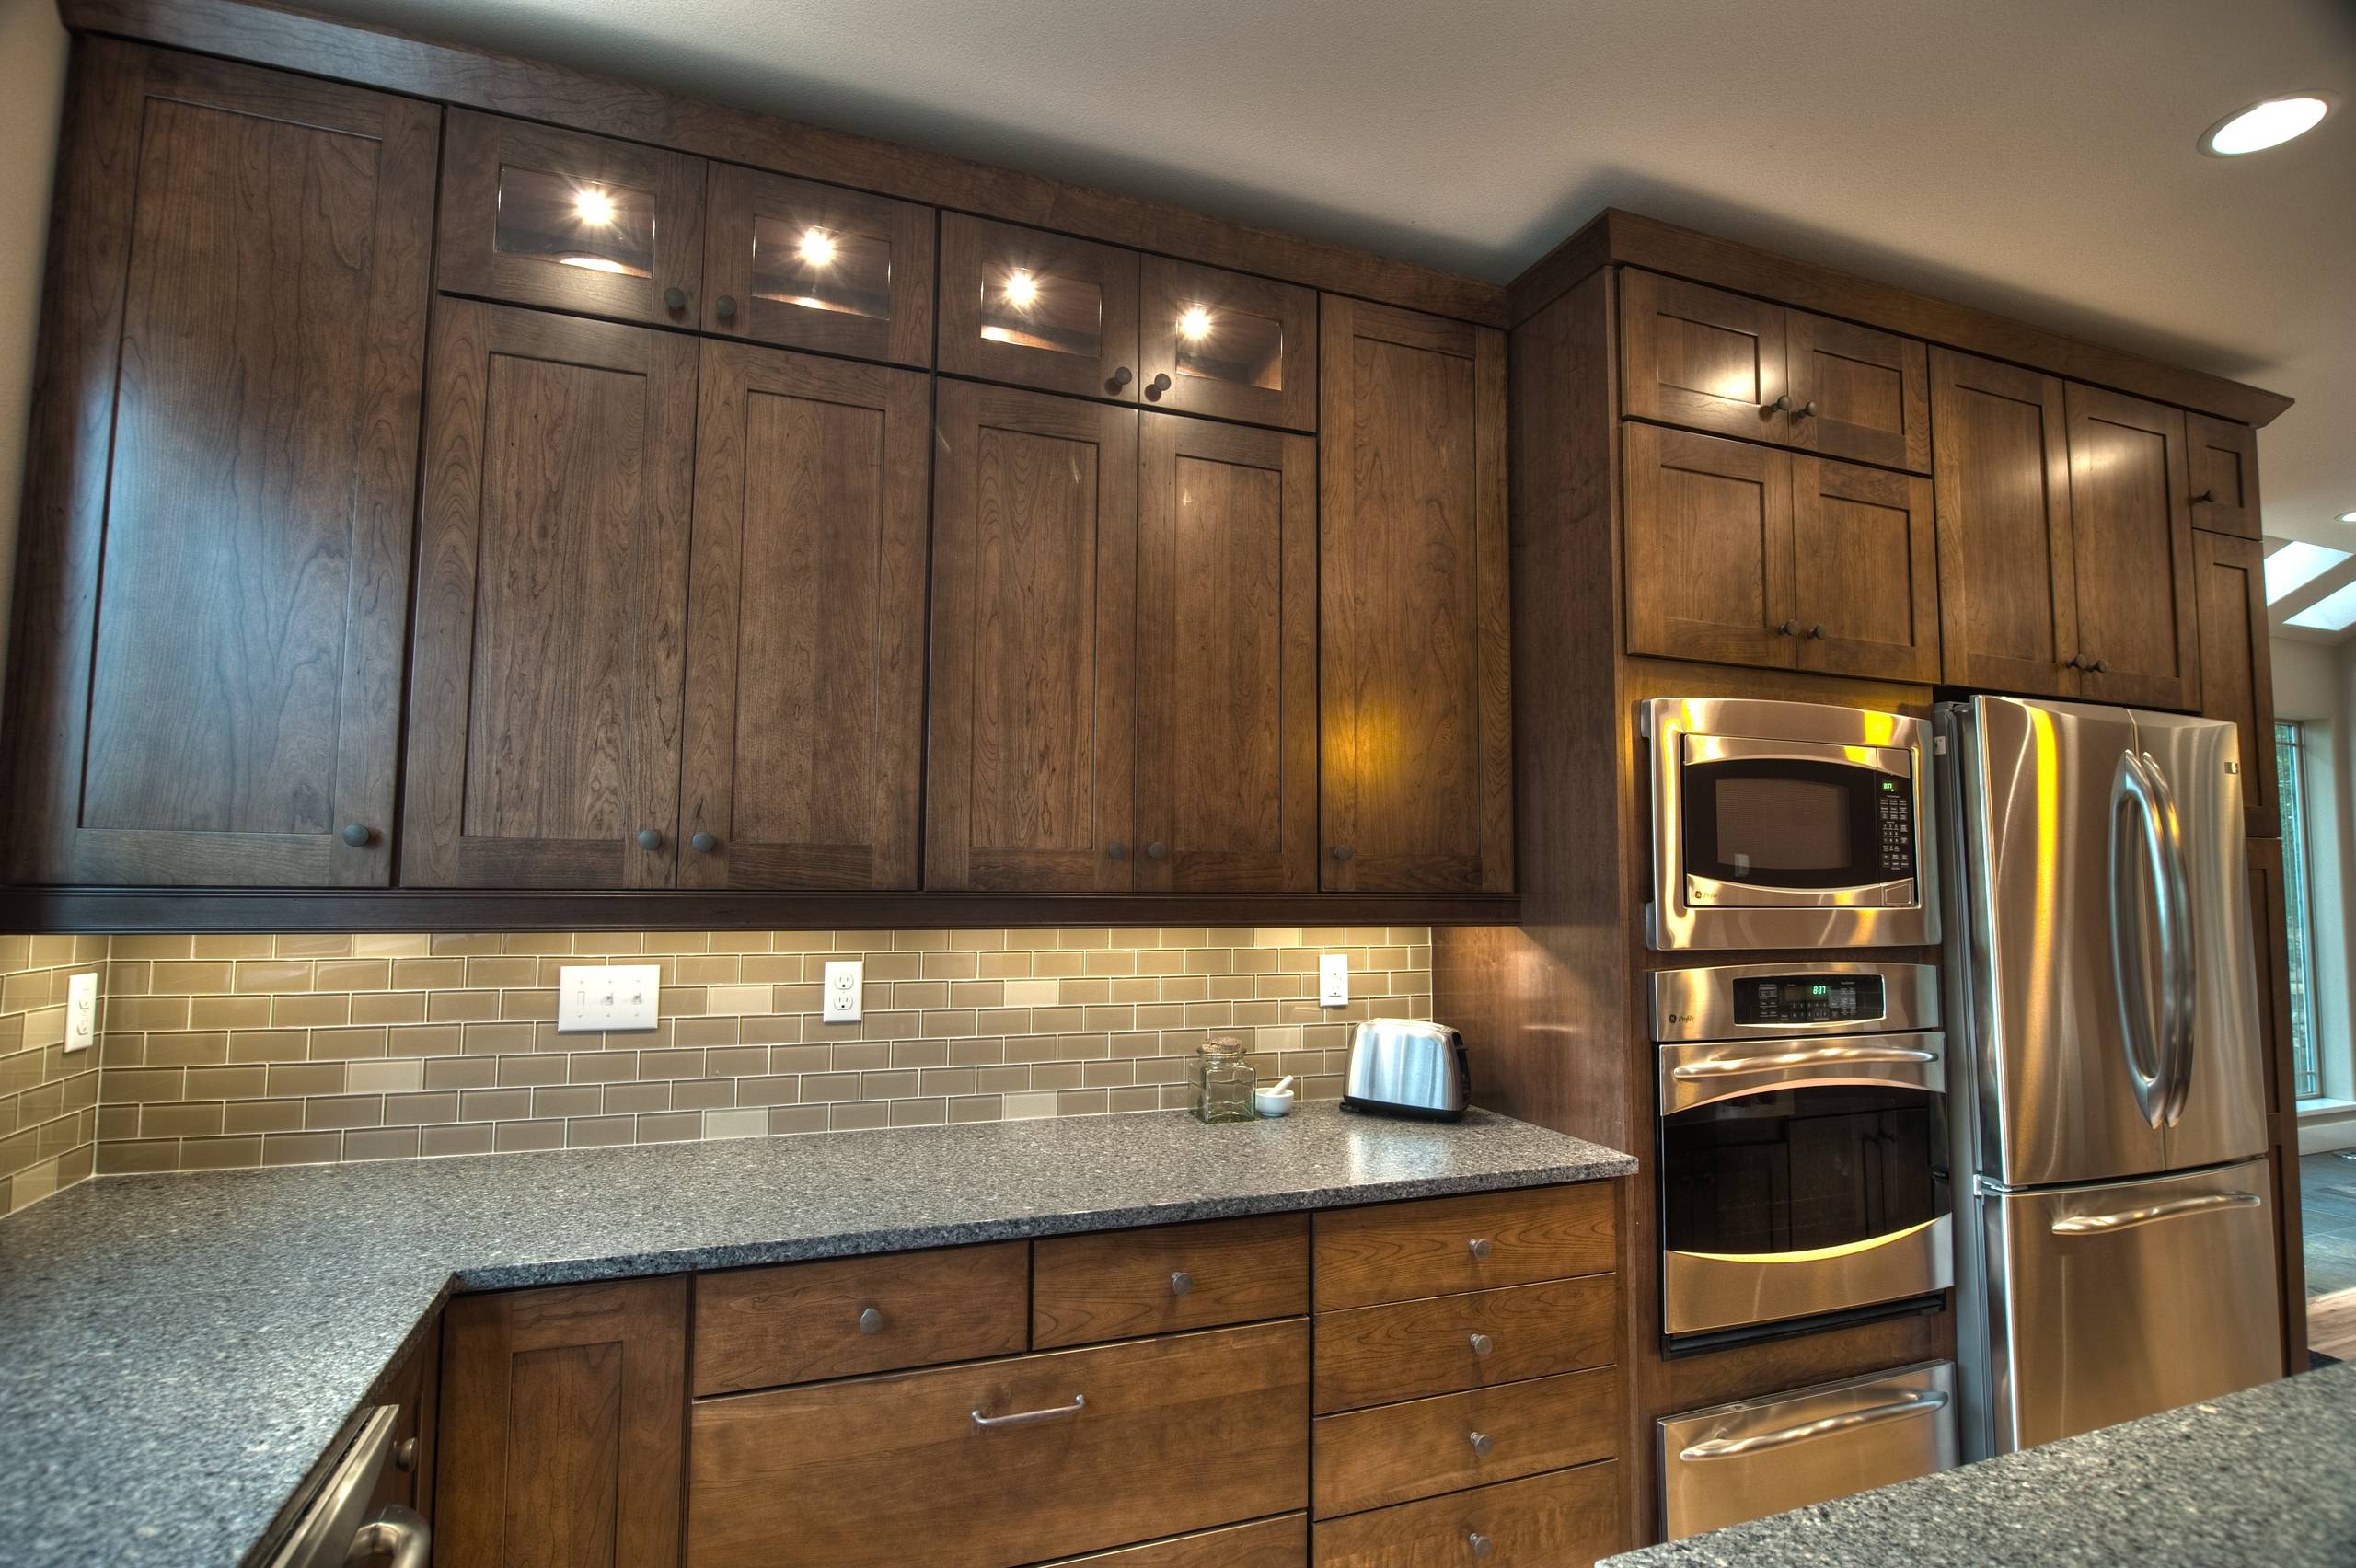 Cognac Cabinet Houzz, What Color Paint Goes With Cognac Cabinets